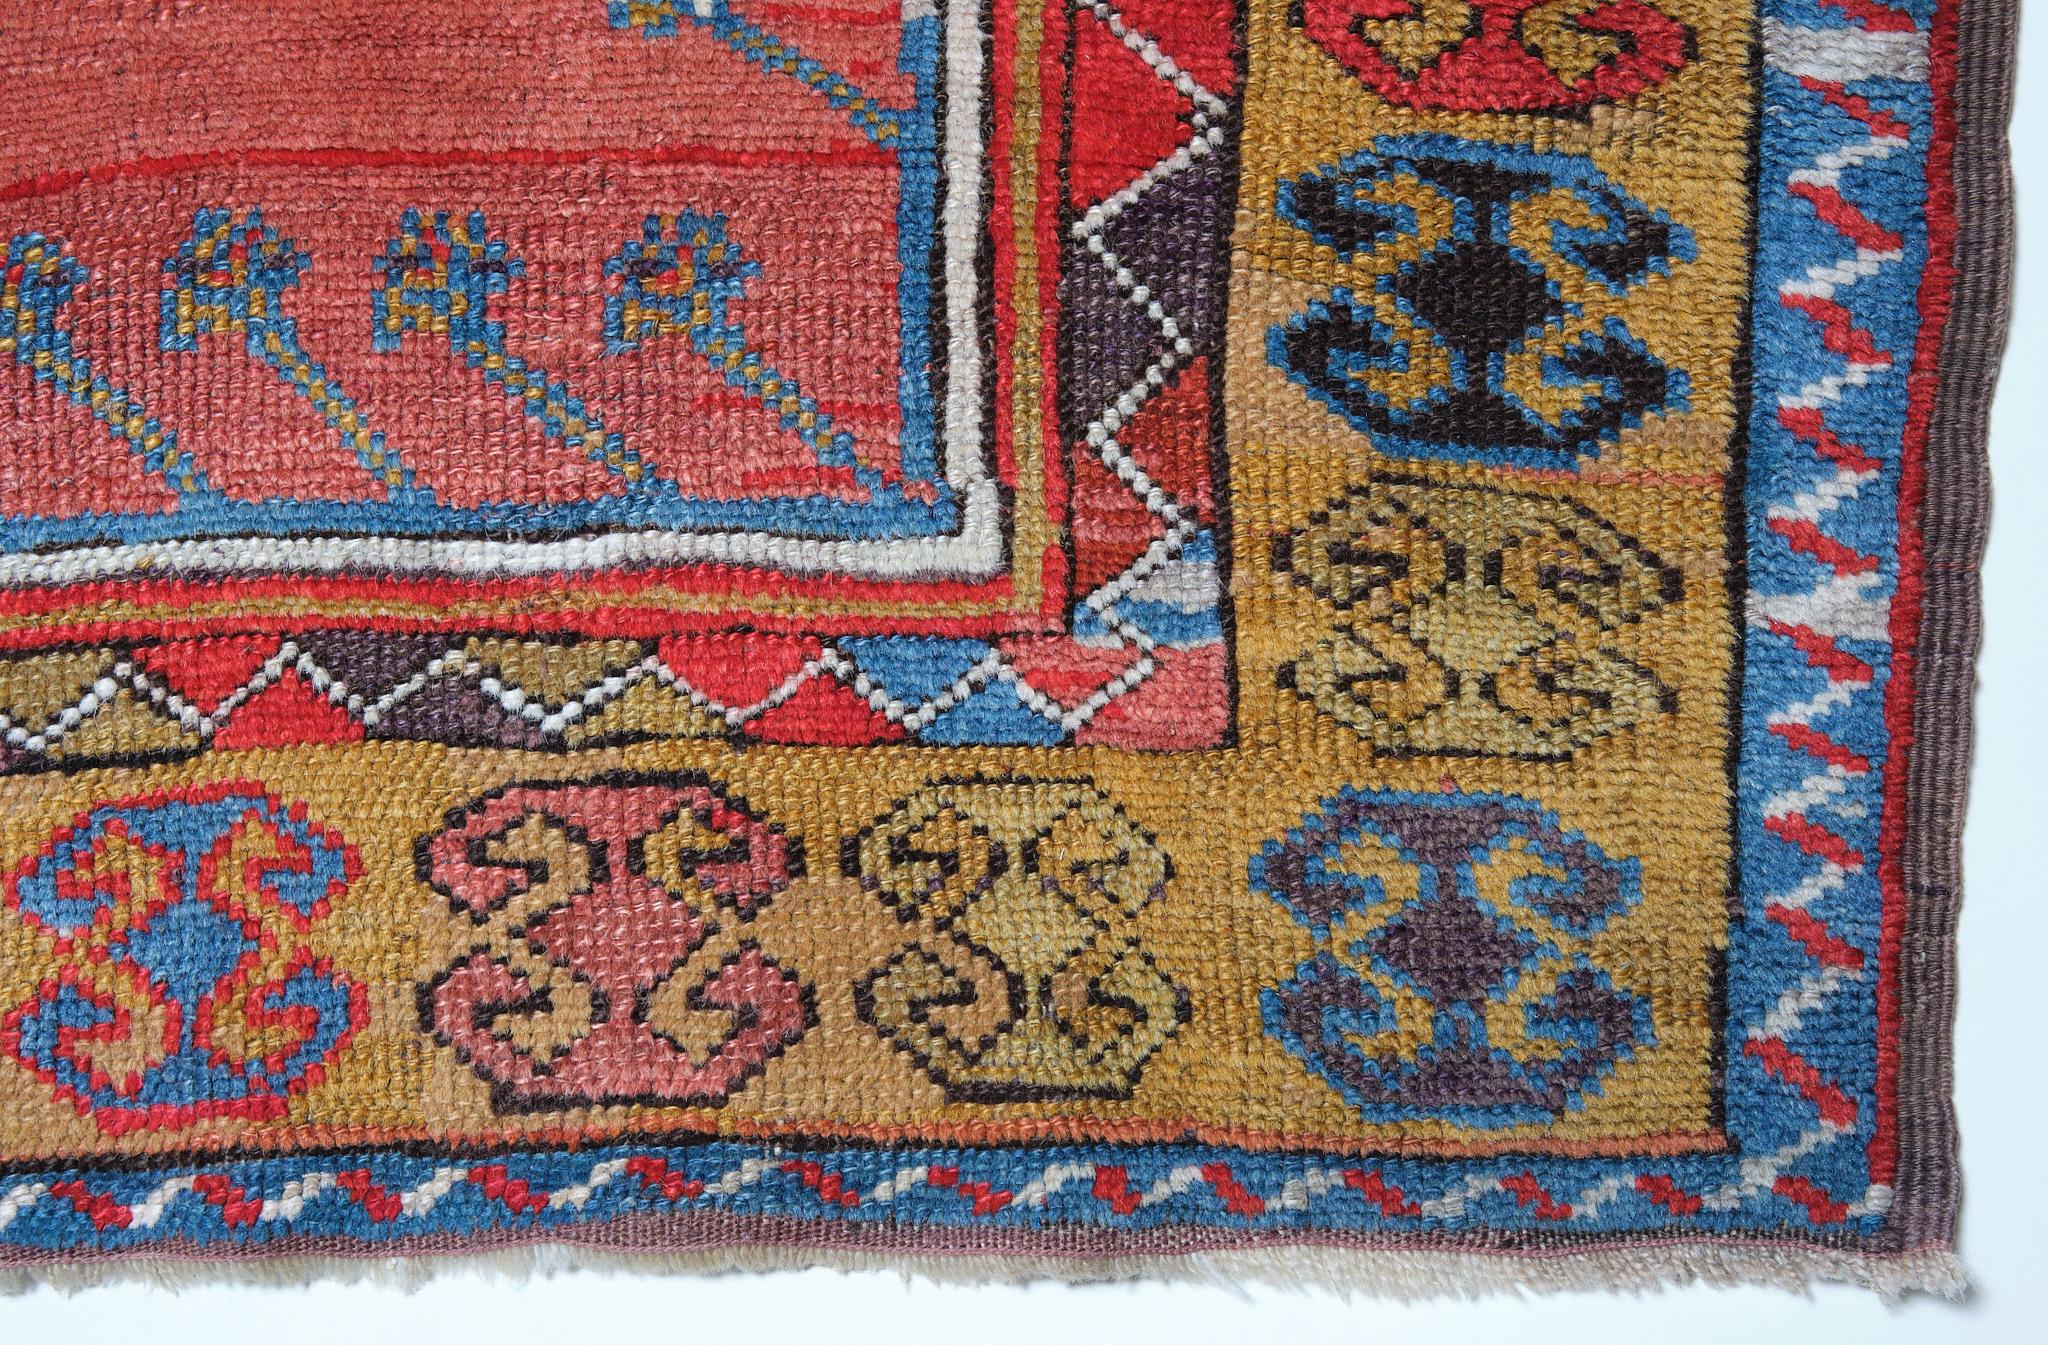 This is a Central Anatolian antique prayer rug from the Konya region with a rare and beautiful color composition.

This is a unique example of an Anatolian Village prayer rug with its typical pattern and a characteristic palette of a particular